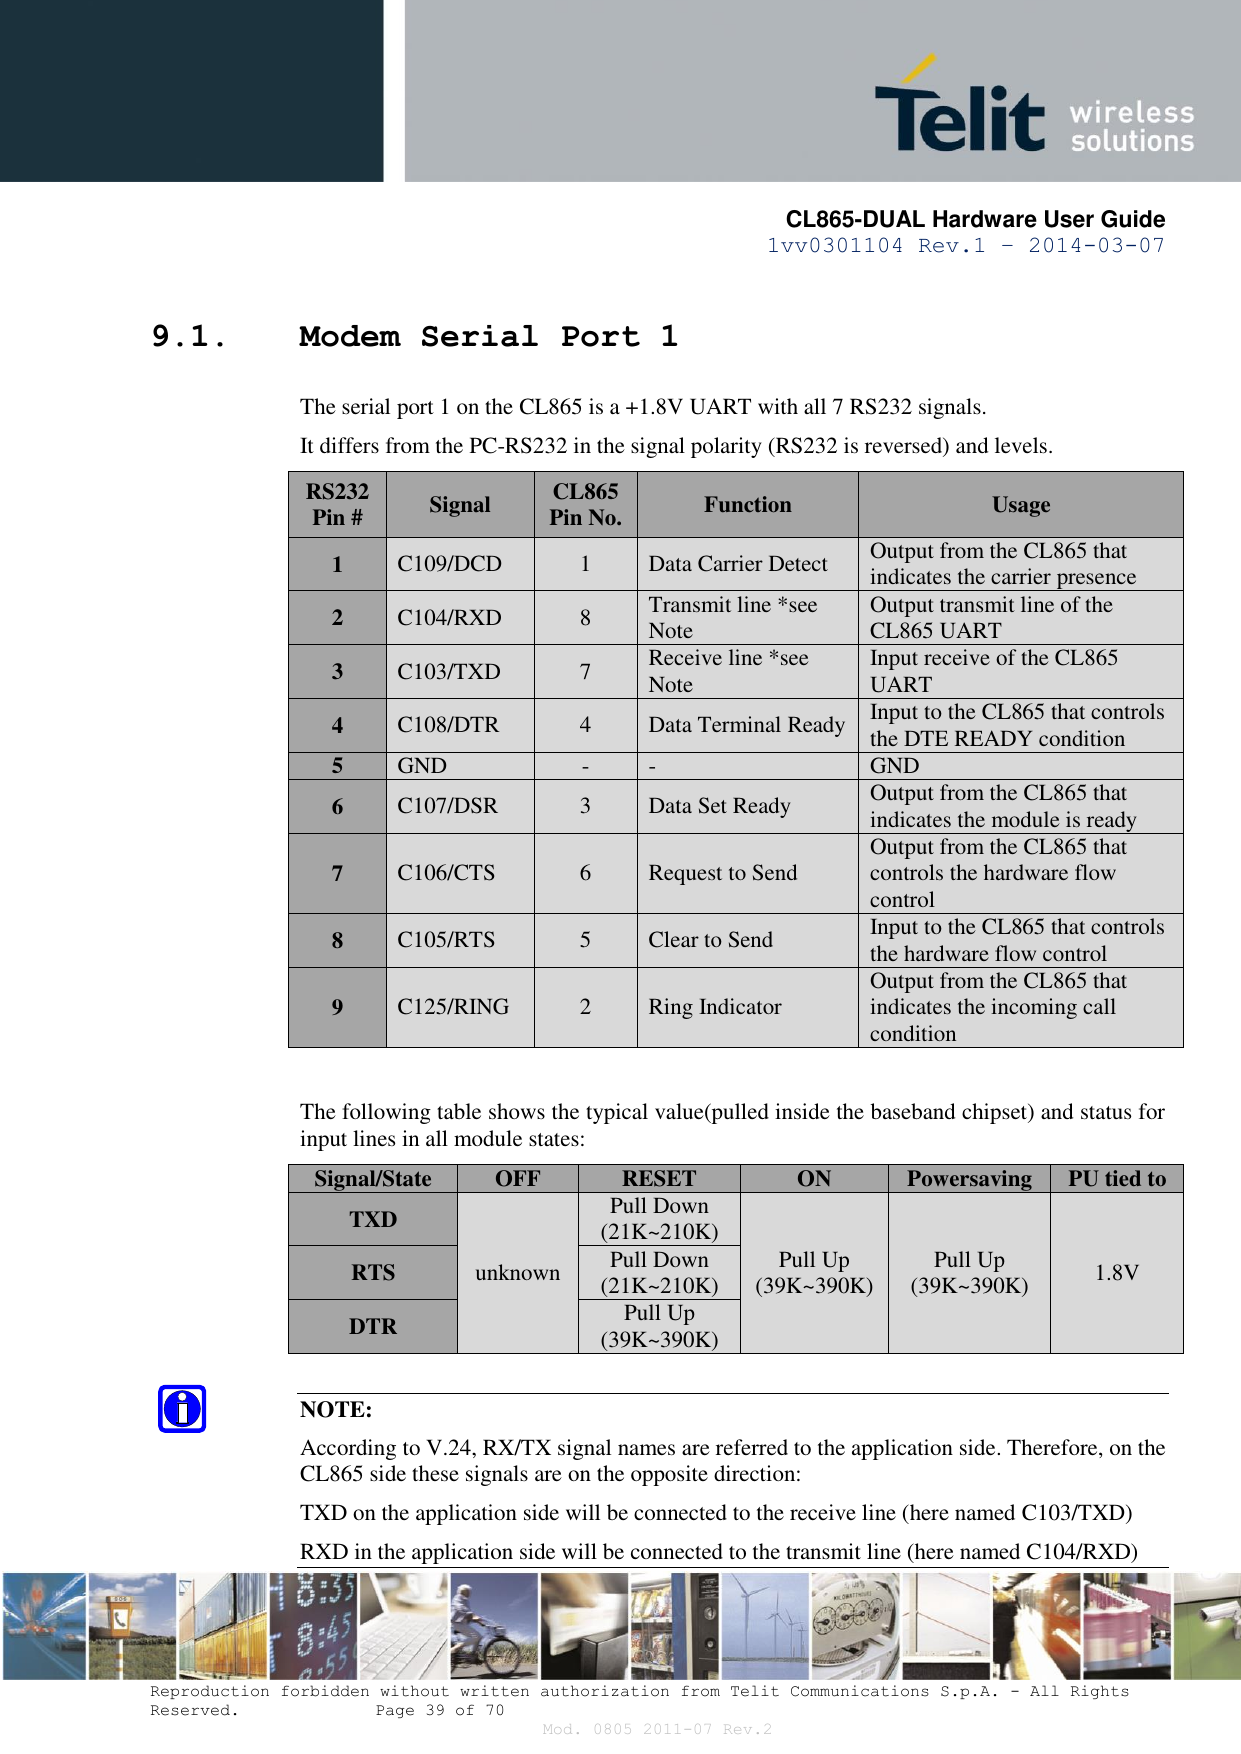       CL865-DUAL Hardware User Guide 1vv0301104 Rev.1 – 2014-03-07  Reproduction forbidden without written authorization from Telit Communications S.p.A. - All Rights Reserved.    Page 39 of 70 Mod. 0805 2011-07 Rev.2 9.1. Modem Serial Port 1 The serial port 1 on the CL865 is a +1.8V UART with all 7 RS232 signals.  It differs from the PC-RS232 in the signal polarity (RS232 is reversed) and levels. RS232 Pin # Signal CL865 Pin No. Function Usage 1 C109/DCD 1 Data Carrier Detect Output from the CL865 that indicates the carrier presence 2 C104/RXD 8 Transmit line *see Note Output transmit line of the CL865 UART 3 C103/TXD 7 Receive line *see Note Input receive of the CL865 UART 4 C108/DTR 4 Data Terminal Ready Input to the CL865 that controls the DTE READY condition 5 GND - - GND 6 C107/DSR 3 Data Set Ready Output from the CL865 that indicates the module is ready 7 C106/CTS 6 Request to Send Output from the CL865 that controls the hardware flow control 8 C105/RTS 5 Clear to Send Input to the CL865 that controls the hardware flow control 9 C125/RING 2 Ring Indicator Output from the CL865 that indicates the incoming call condition  The following table shows the typical value(pulled inside the baseband chipset) and status for input lines in all module states: Signal/State OFF RESET ON Powersaving PU tied to TXD unknown Pull Down (21K~210K) Pull Up (39K~390K) Pull Up (39K~390K) 1.8V RTS Pull Down (21K~210K) DTR Pull Up (39K~390K)  NOTE: According to V.24, RX/TX signal names are referred to the application side. Therefore, on the CL865 side these signals are on the opposite direction: TXD on the application side will be connected to the receive line (here named C103/TXD) RXD in the application side will be connected to the transmit line (here named C104/RXD) 